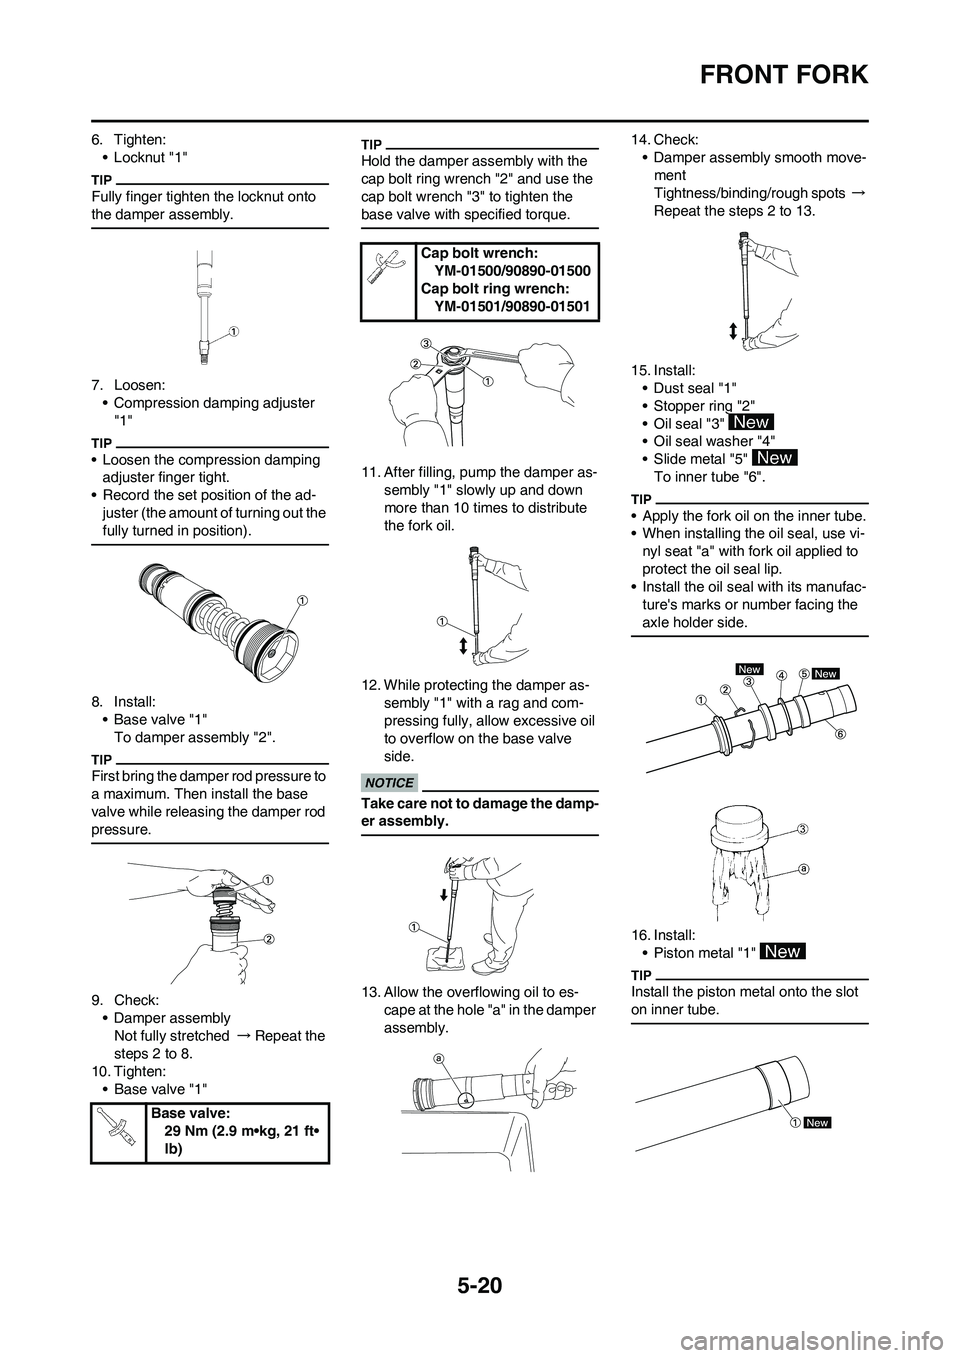 YAMAHA YZ250F 2009  Owners Manual 5-20
FRONT FORK
6. Tighten:
• Locknut "1"
Fully finger tighten the locknut onto 
the damper assembly.
7. Loosen:
• Compression damping adjuster 
"1"
• Loosen the compression damping 
adjuster fi